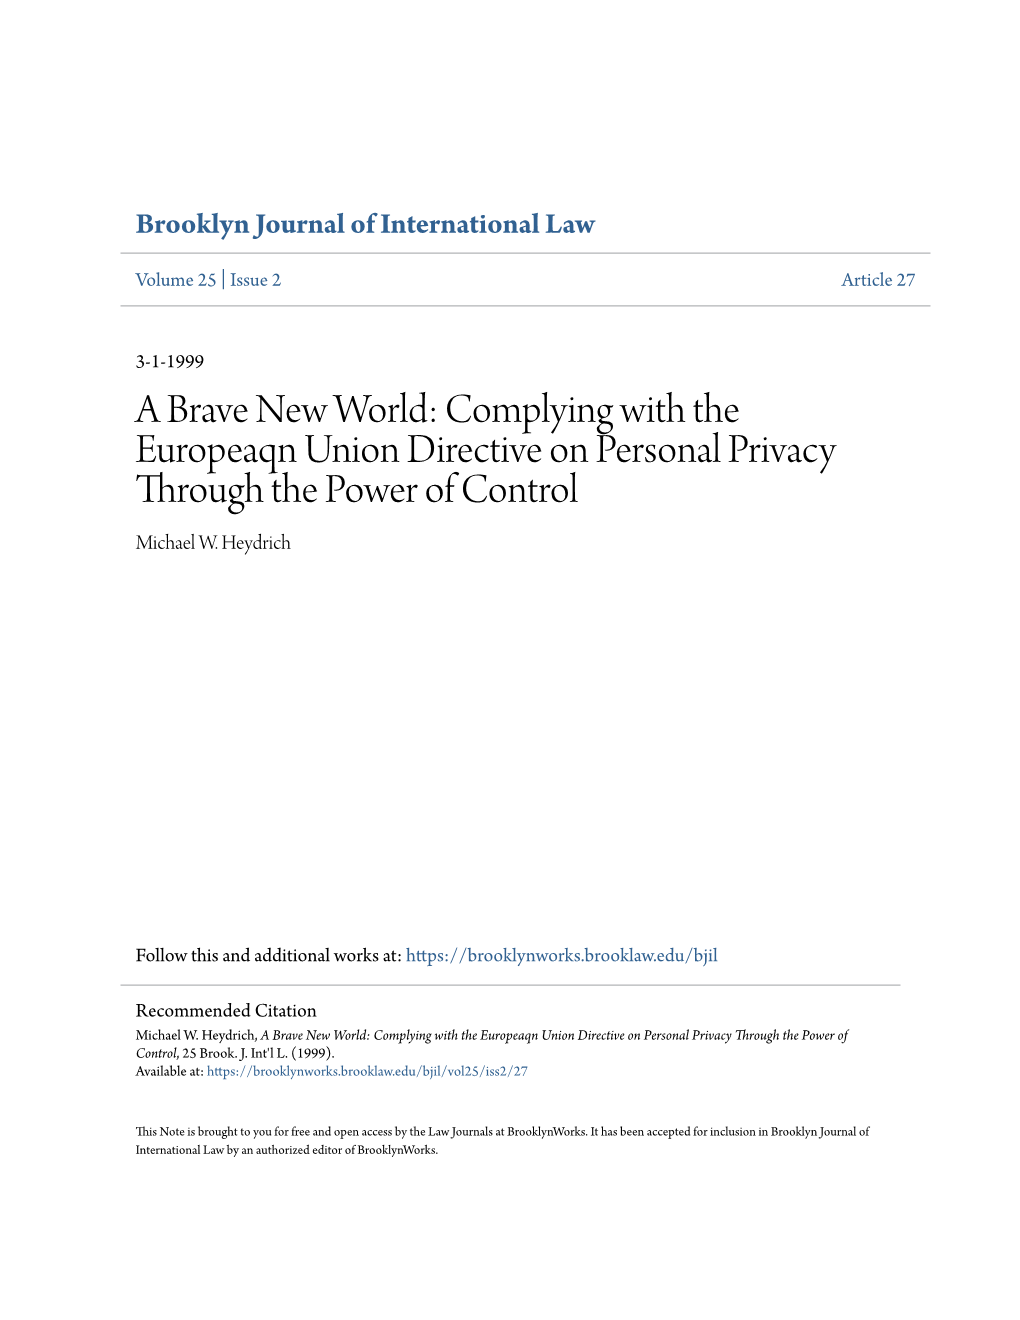 Complying with the Europeaqn Union Directive on Personal Privacy Through the Power of Control Michael W